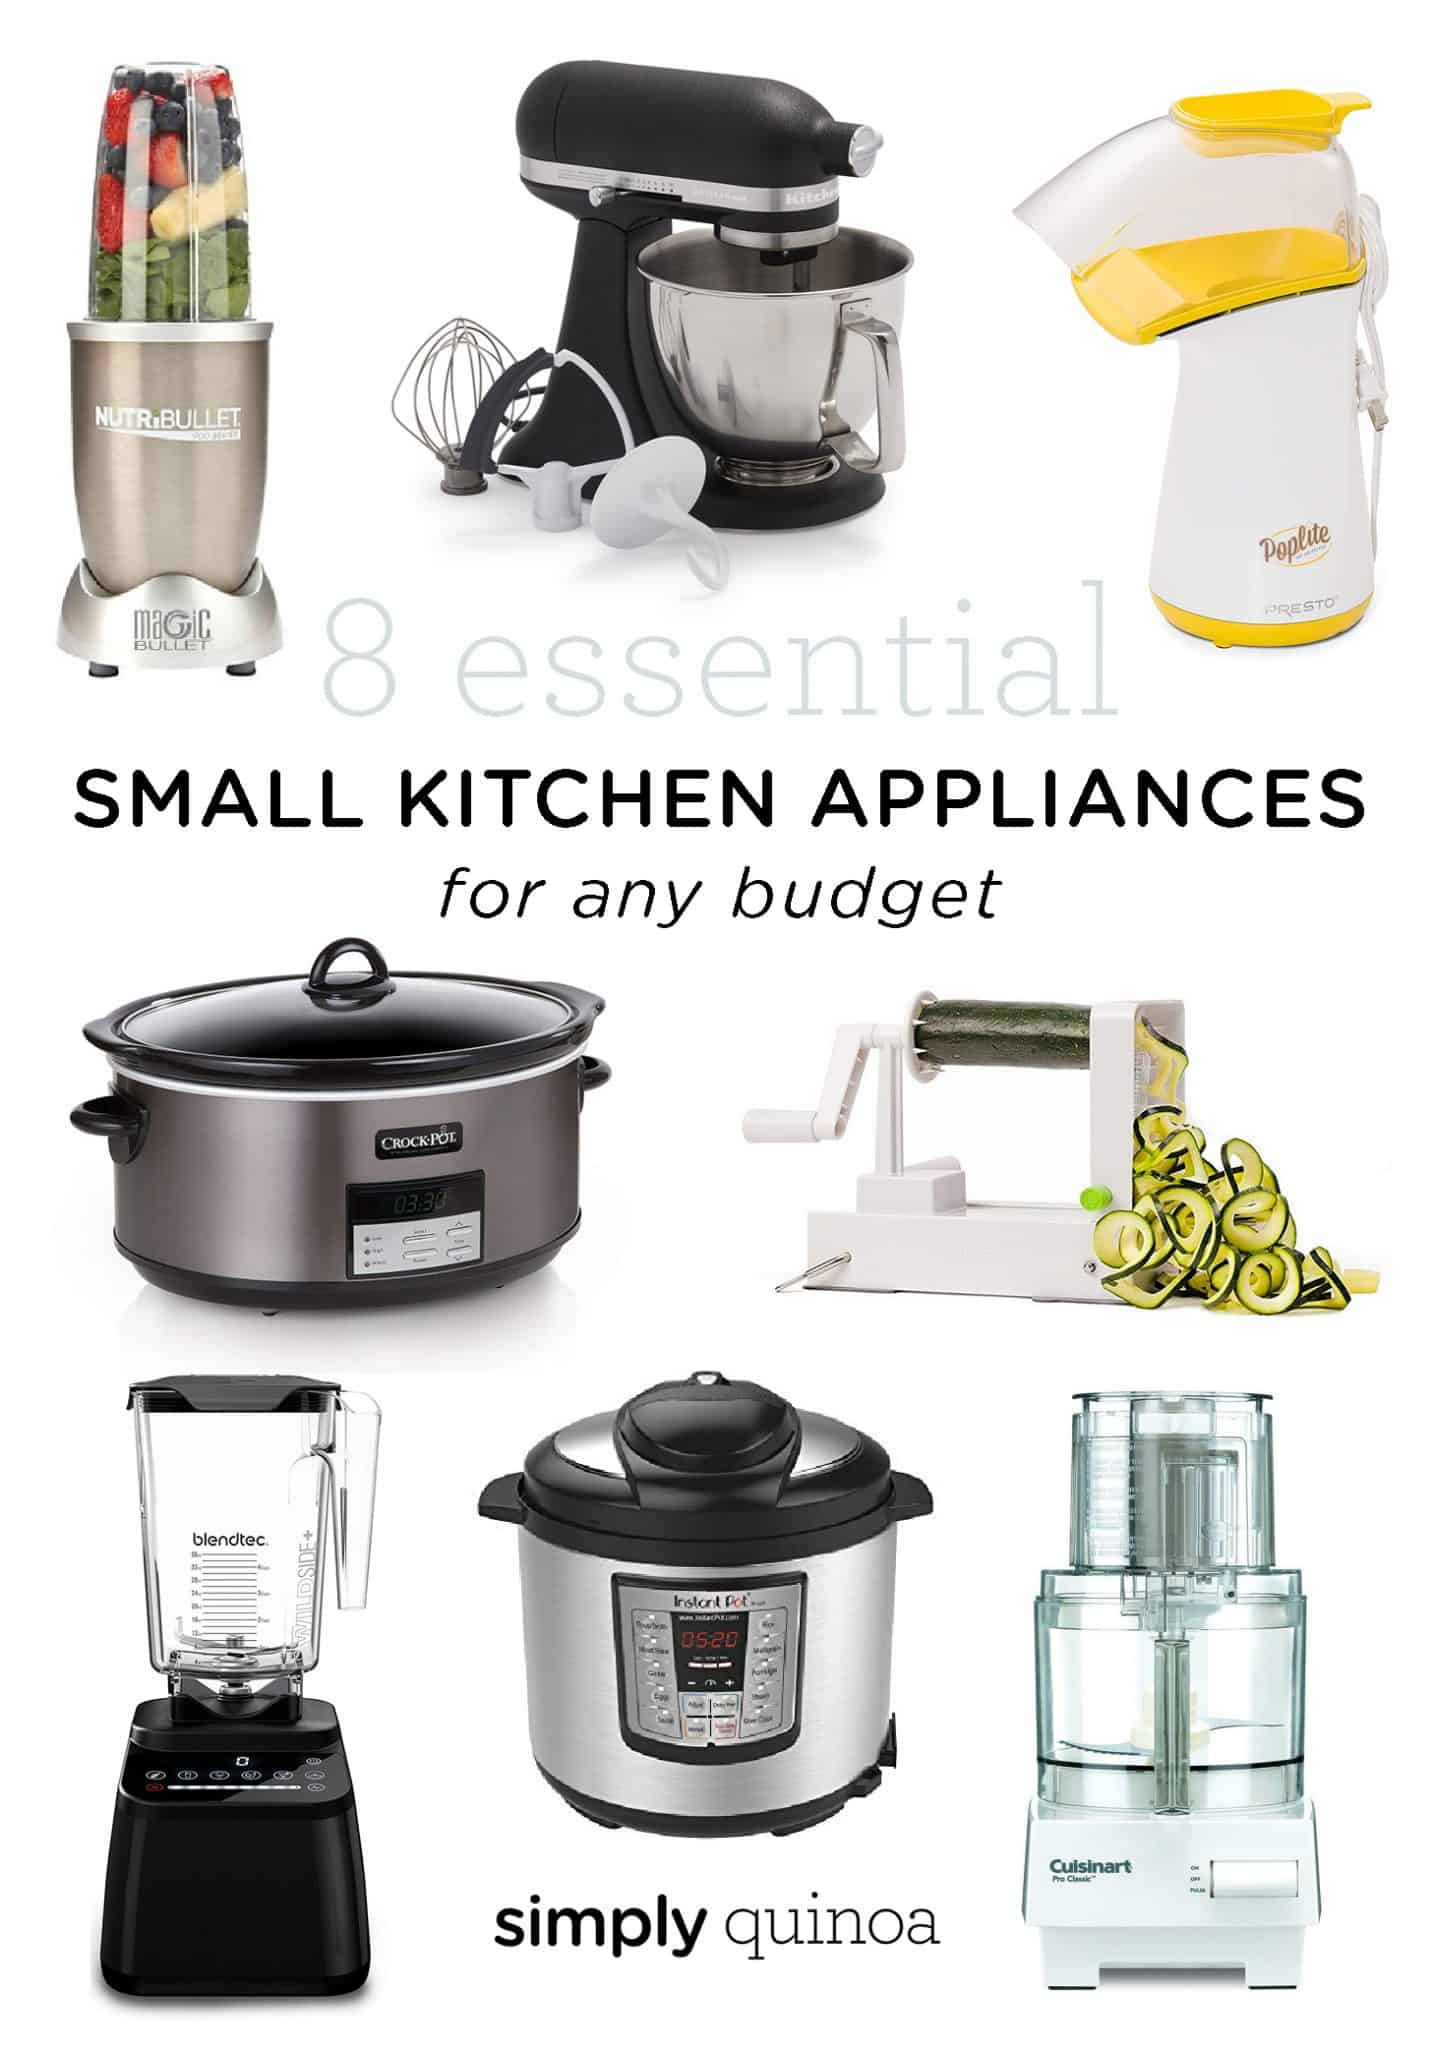 Small Kitchen Appliances
 8 Essential Small Kitchen Appliances for Any Bud